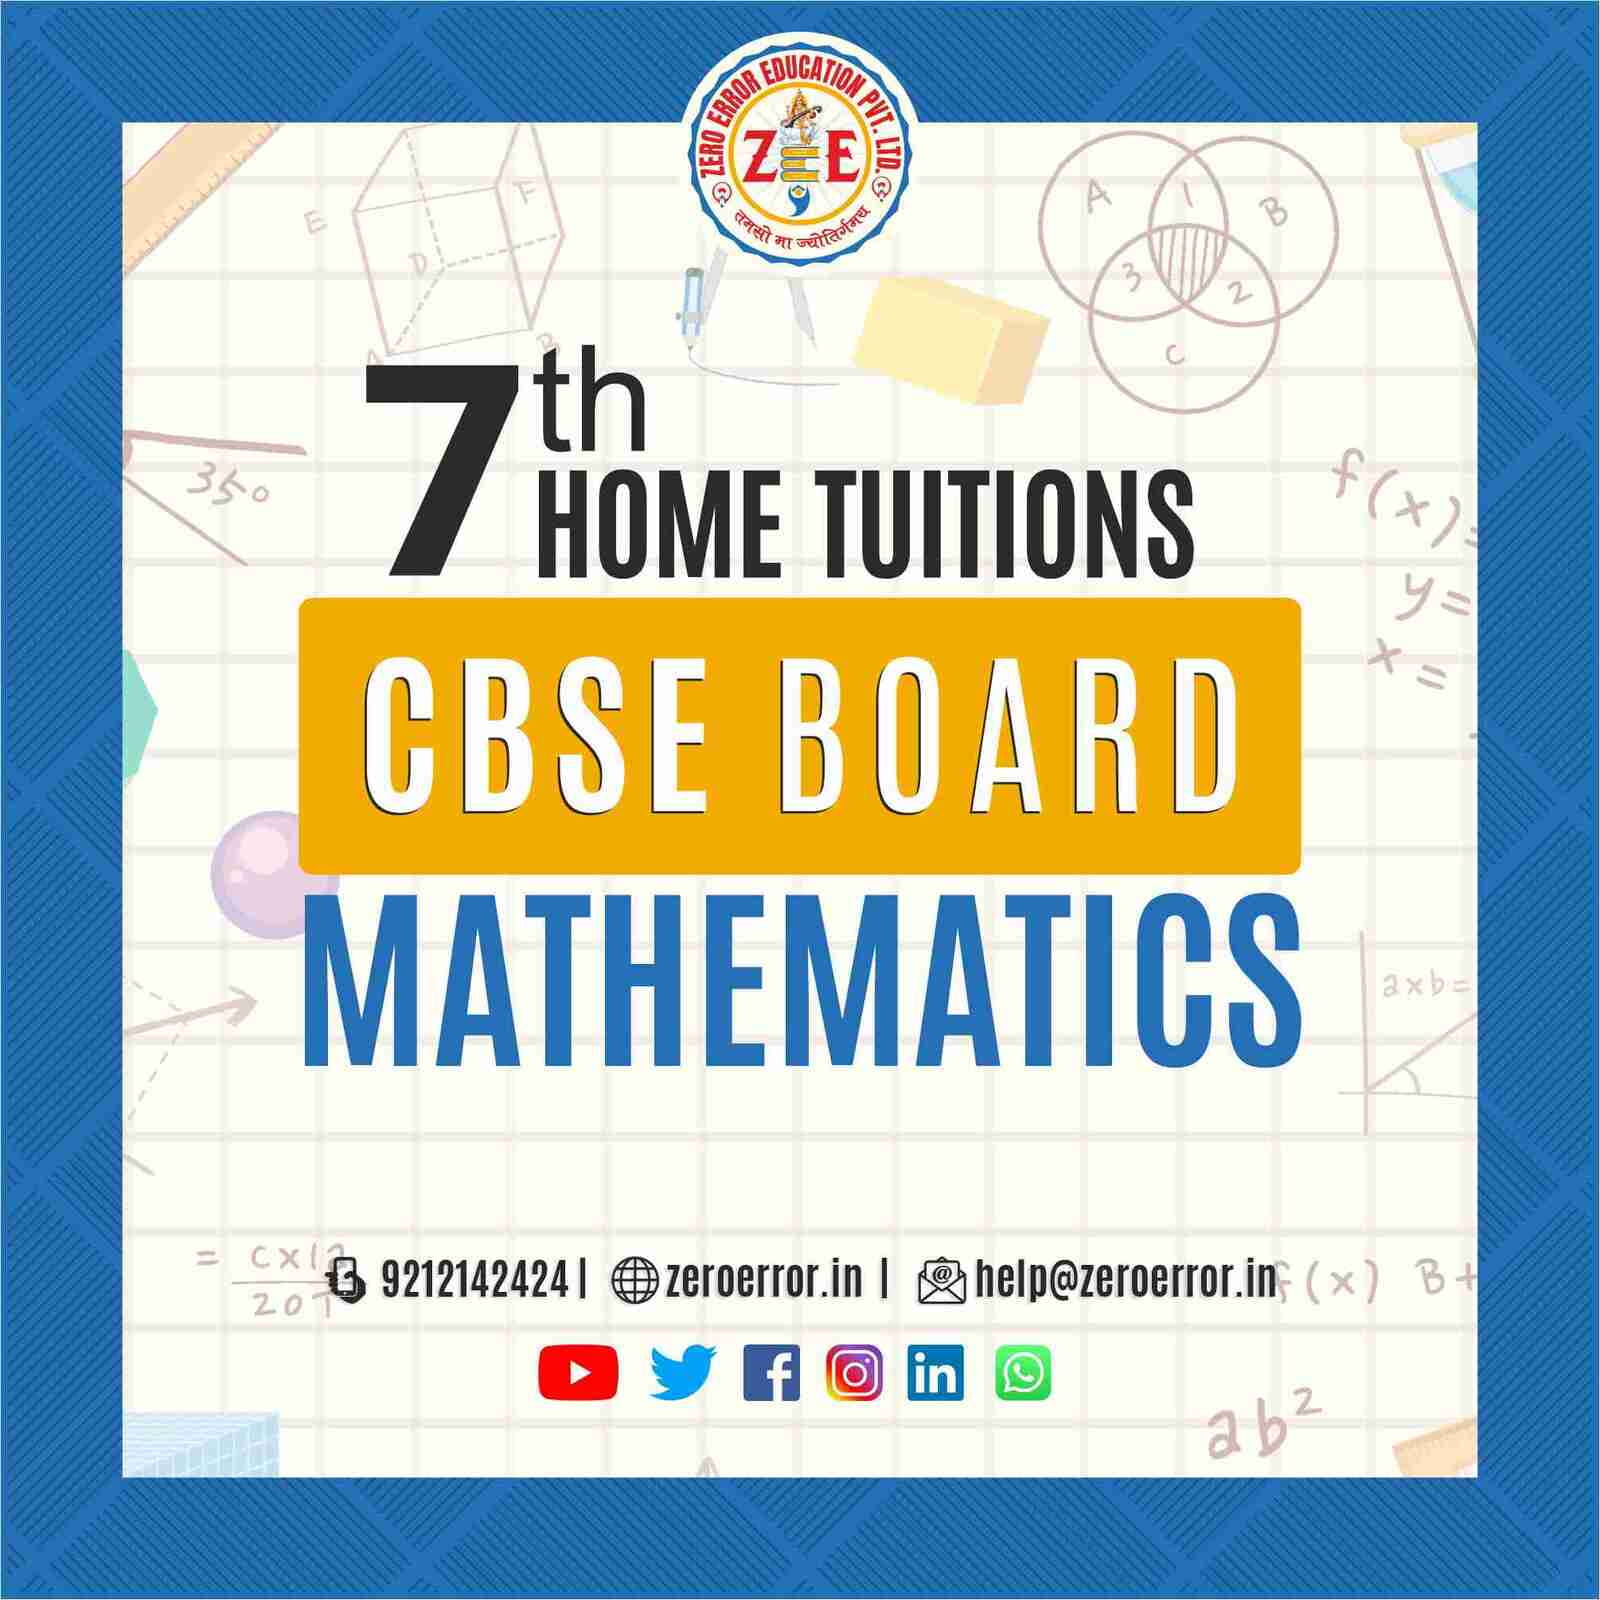 7th Grade CBSE Math's Online Classes by Zero Error Education Prepare for your CBSE board exams with online and offline Math's classes for 7th grade. Learn from experienced home tutors and get all the help you need to succeed. Enroll today at Zero Error Education. [https://zeroerror.in/] Call 9212142424 for more information.